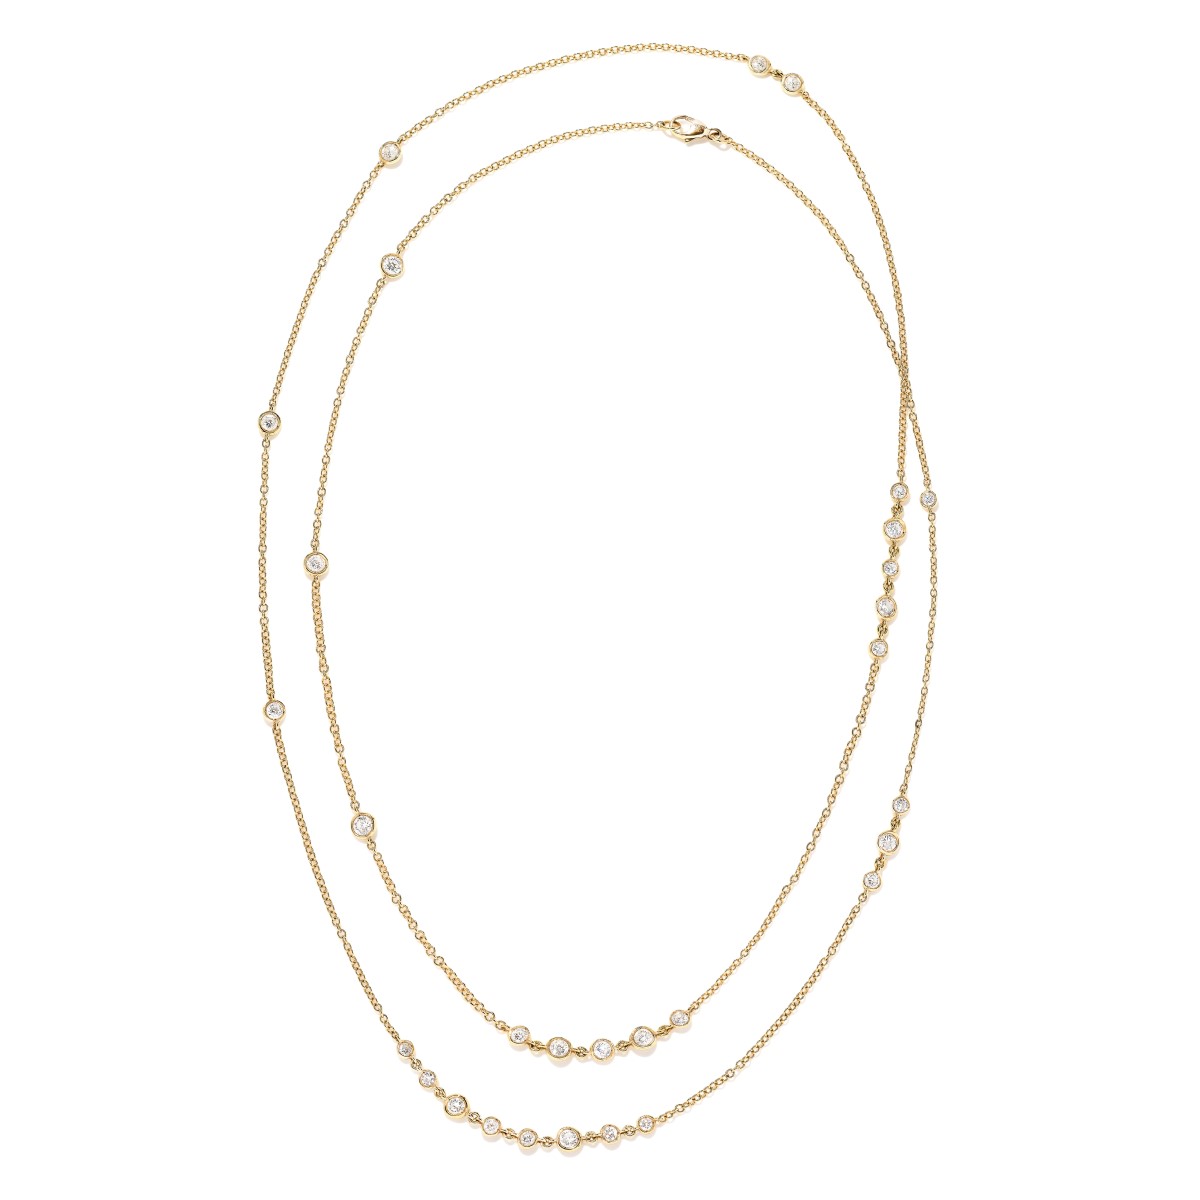 DIAMOND CHAIN NECKLACE 18CT YELLOW GOLD